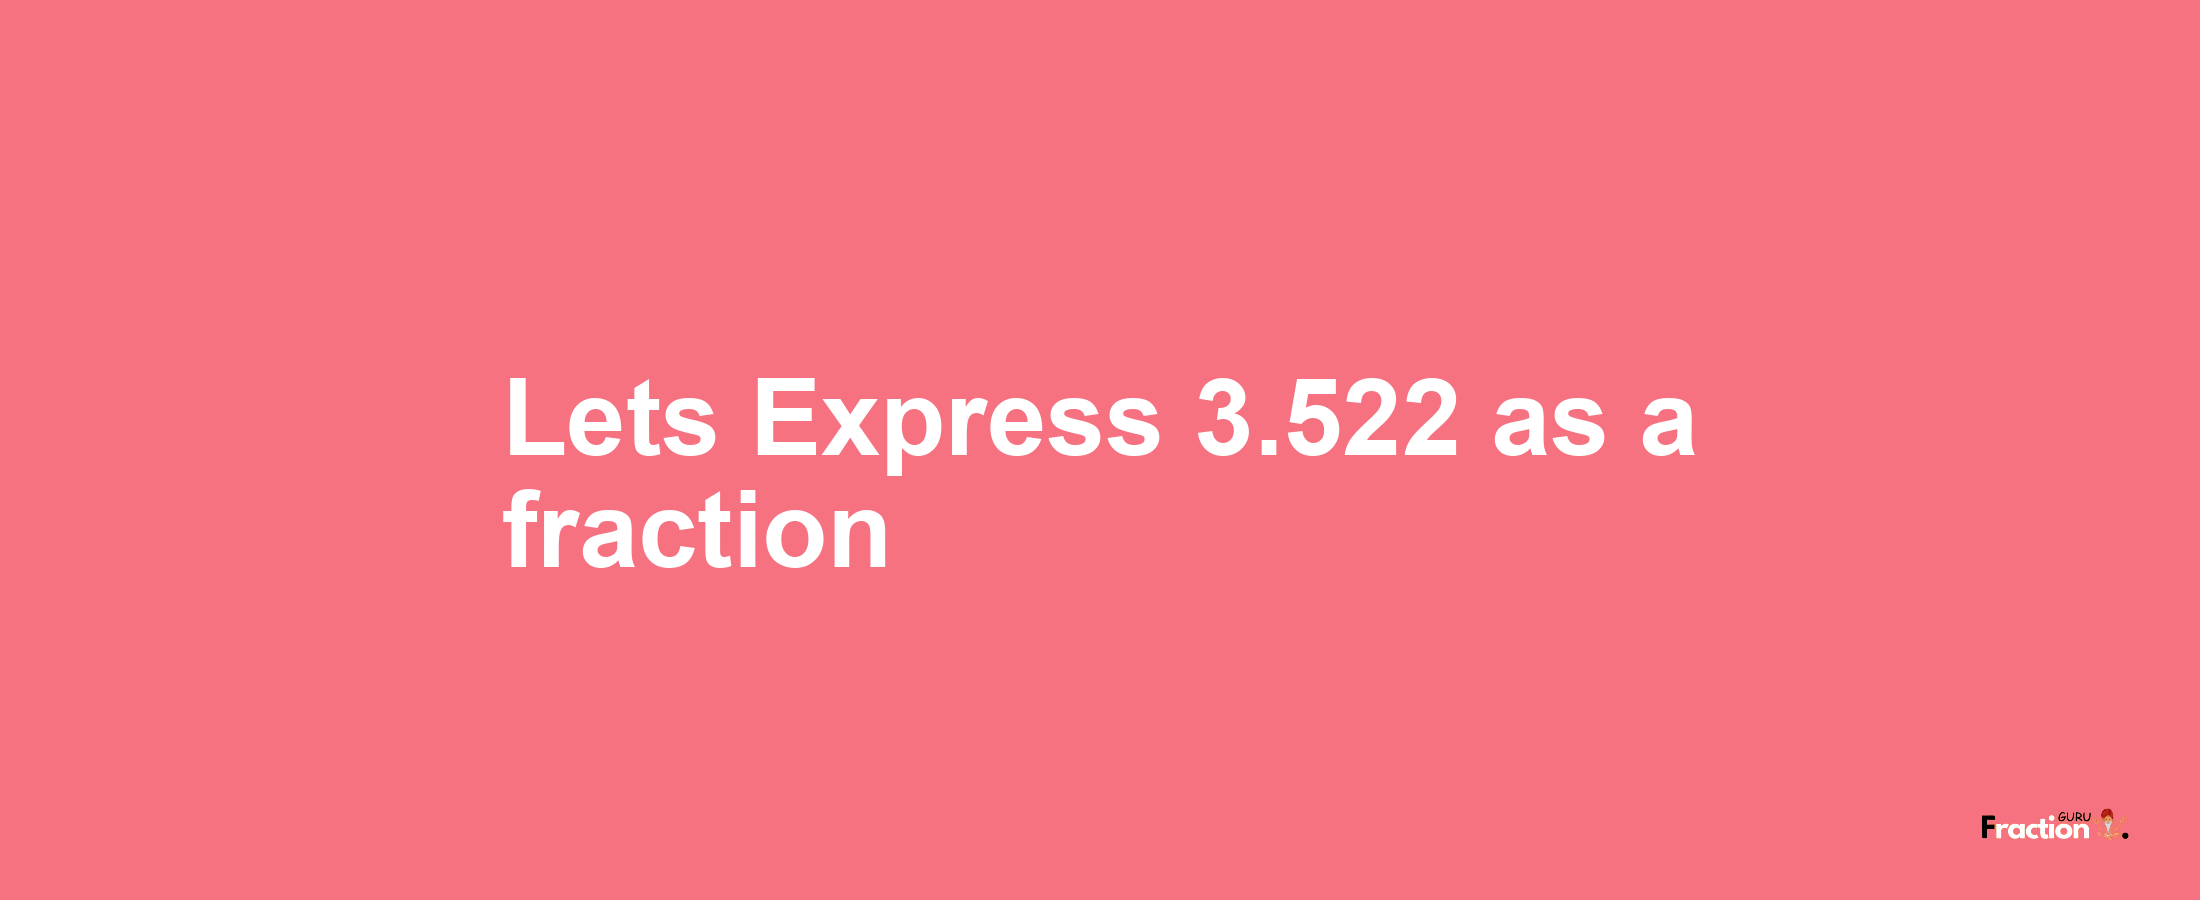 Lets Express 3.522 as afraction